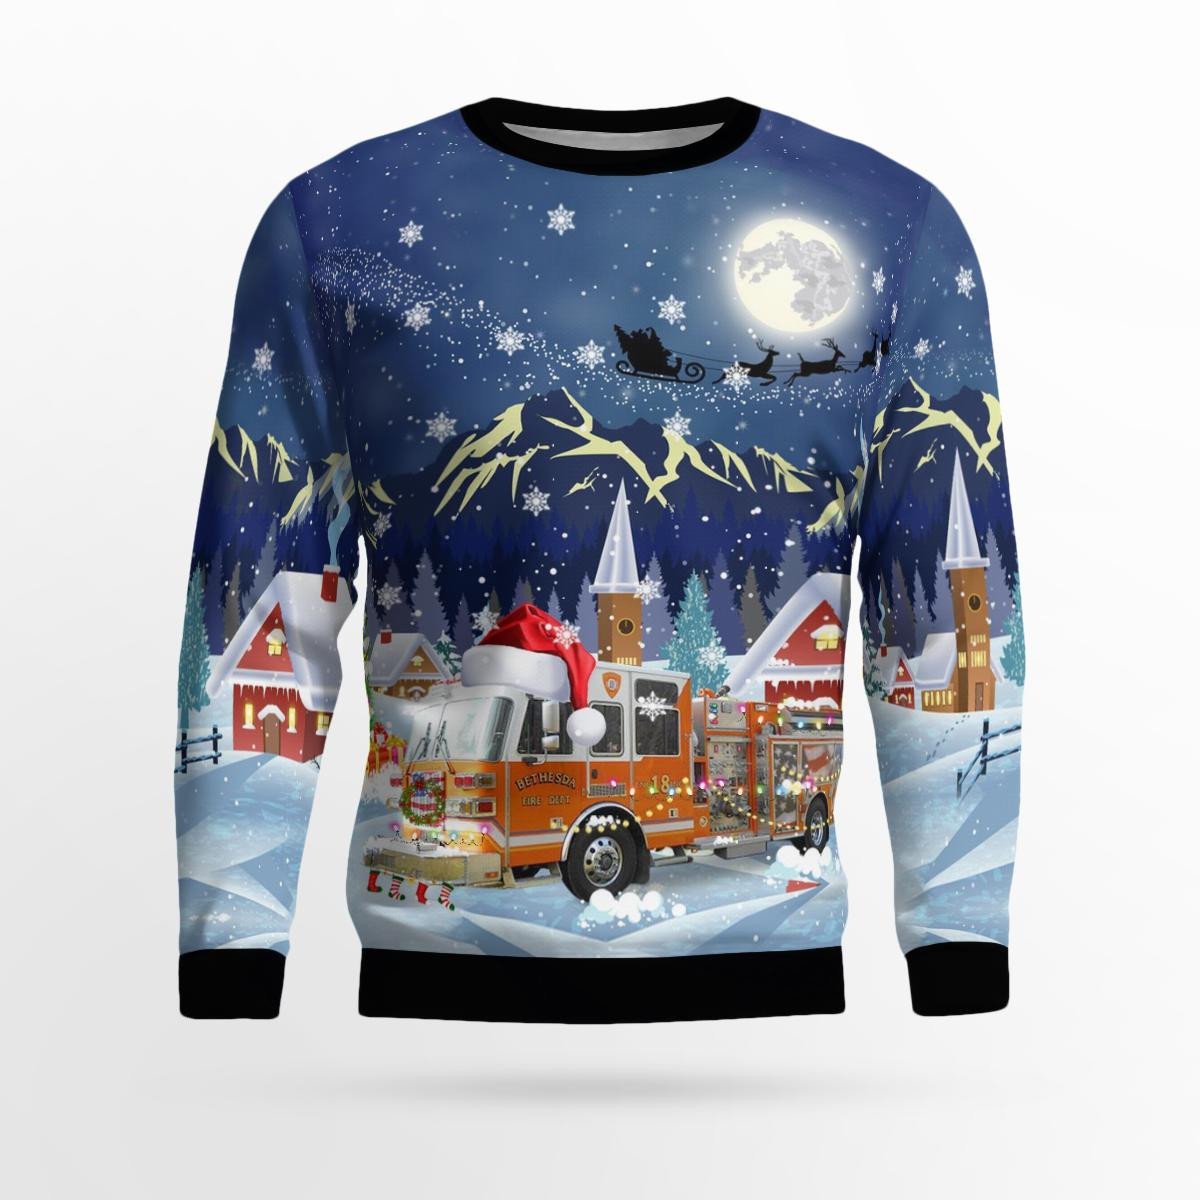 Ohio/ Bethesda Fire Department Christmas Aop Ugly Sweater/ Gift for Firefighter